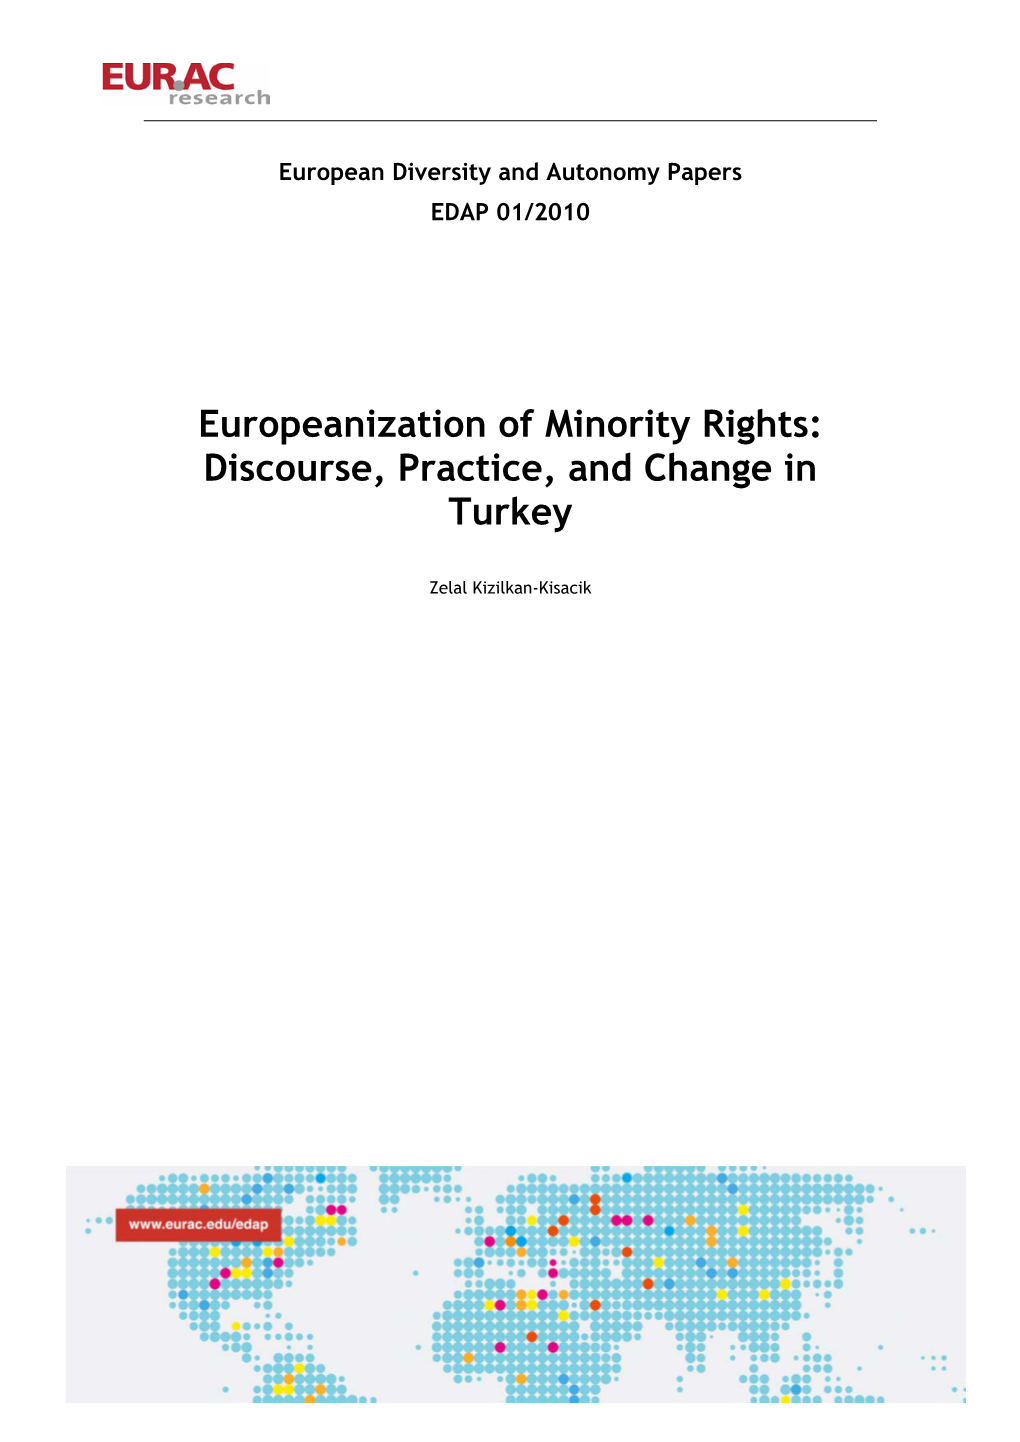 Europeanization of Minority Rights, Discourse, Practice, and Change In